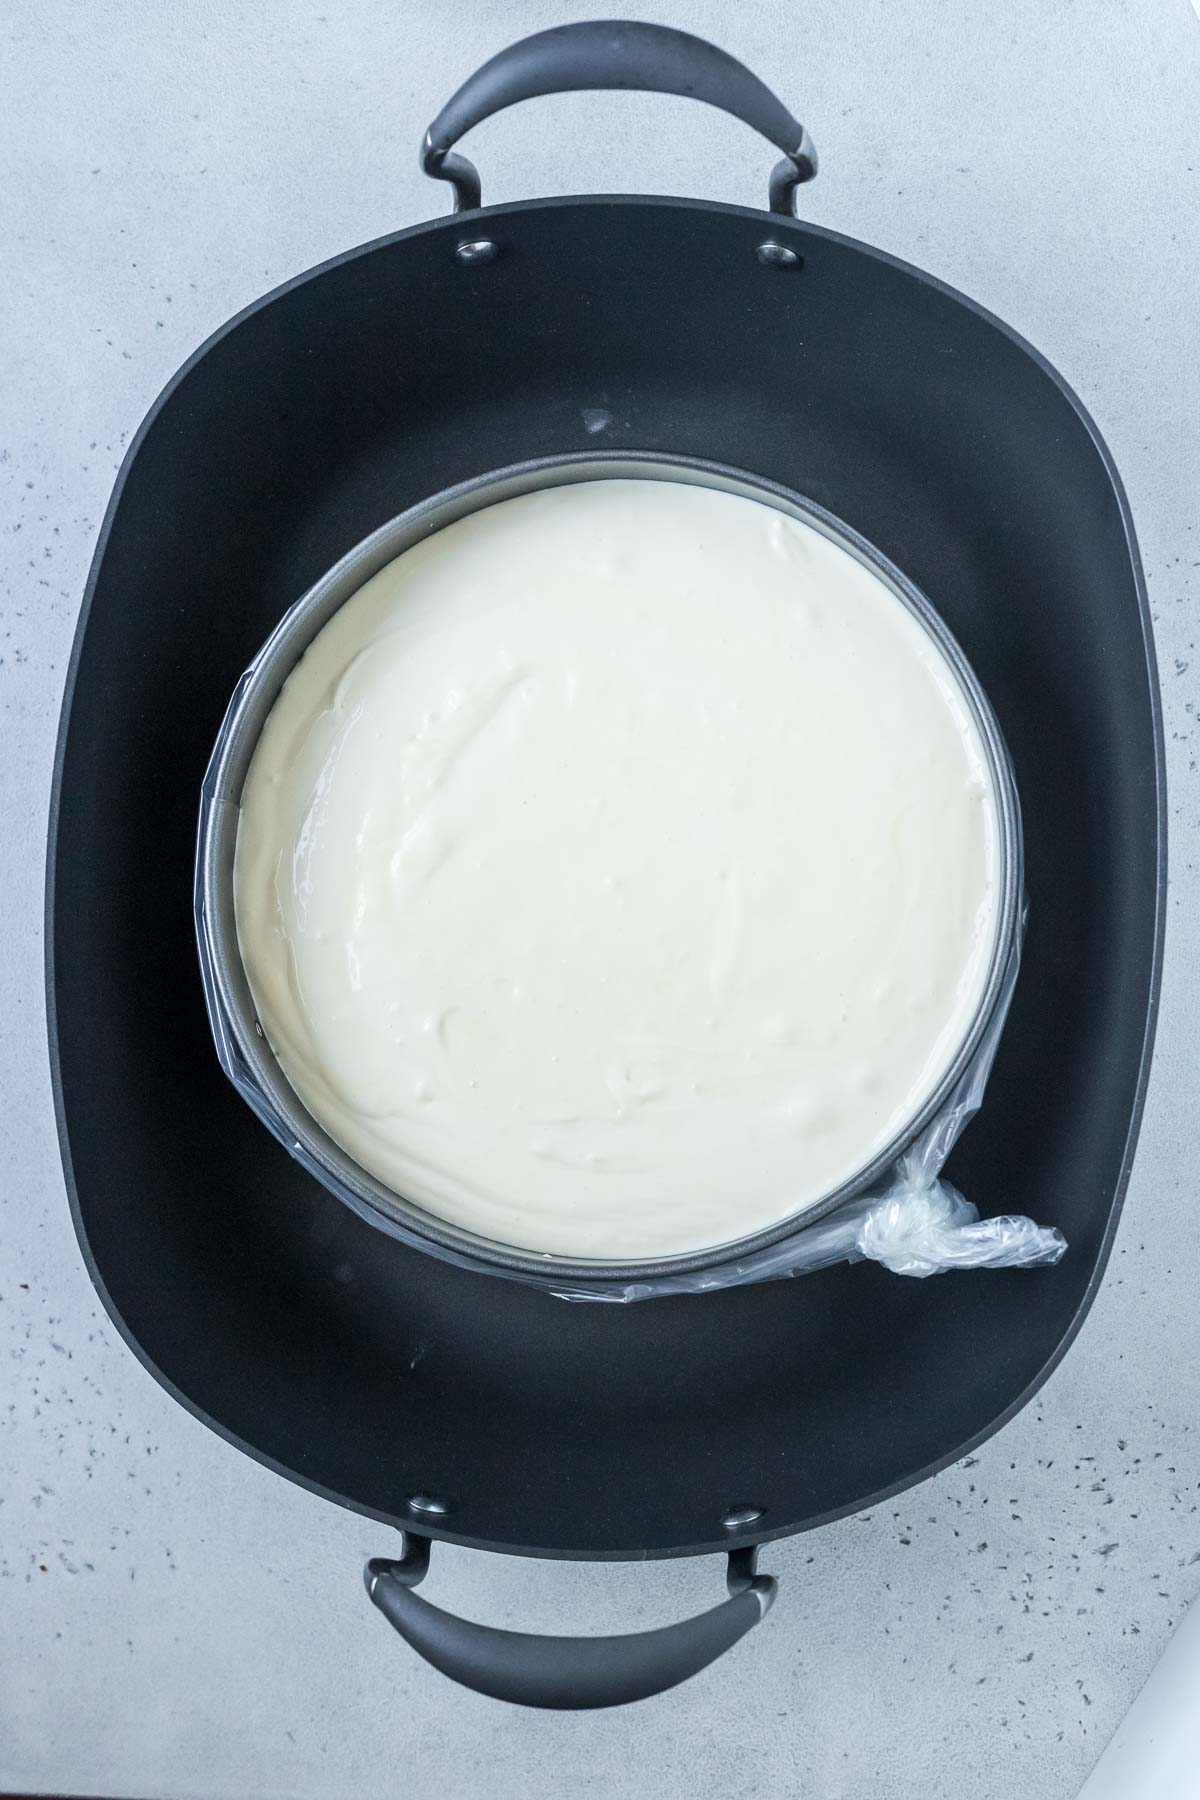 unbaked cheesecake placed inside large roasting pan